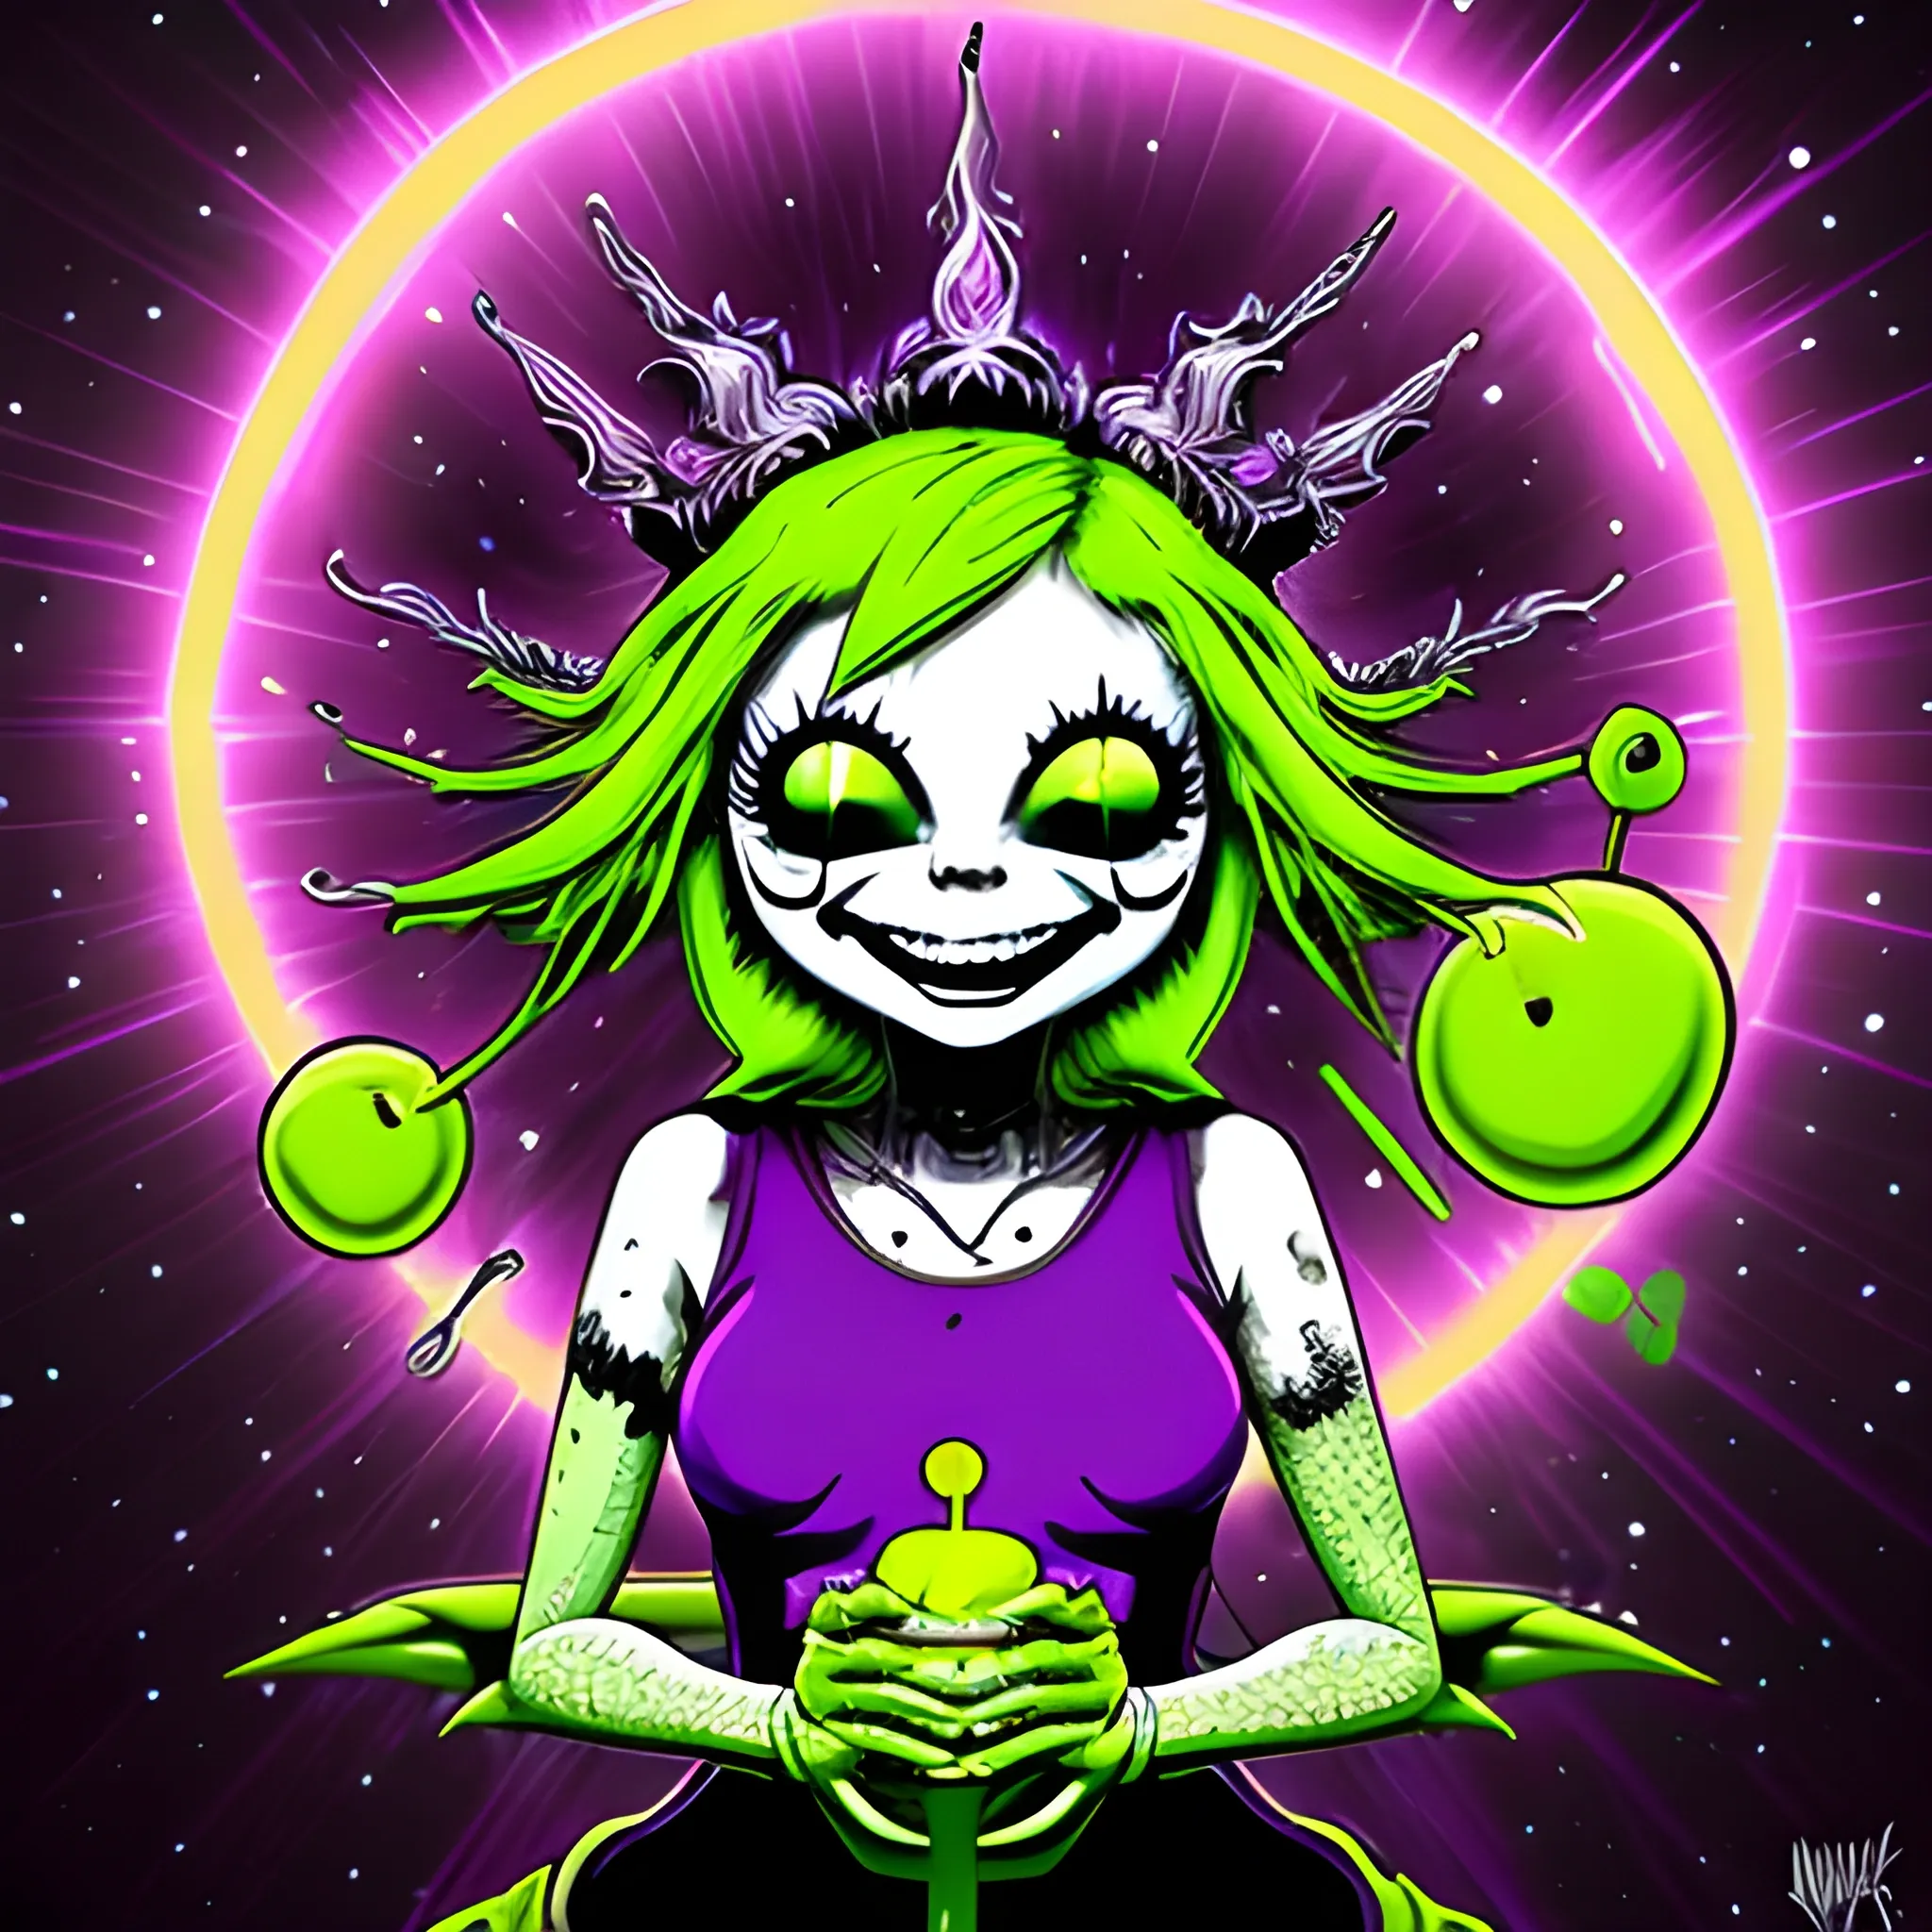 neon grape purple, dayglo orange, chartreuse green, Halloween, amethyst smoking goddess, combine the styles of Munk One and Alex Pardee, trending on deviantart, lowbrow, heavy metal tshirt design, big smile picture, on a black background, luminous color sparkles, nebula sky